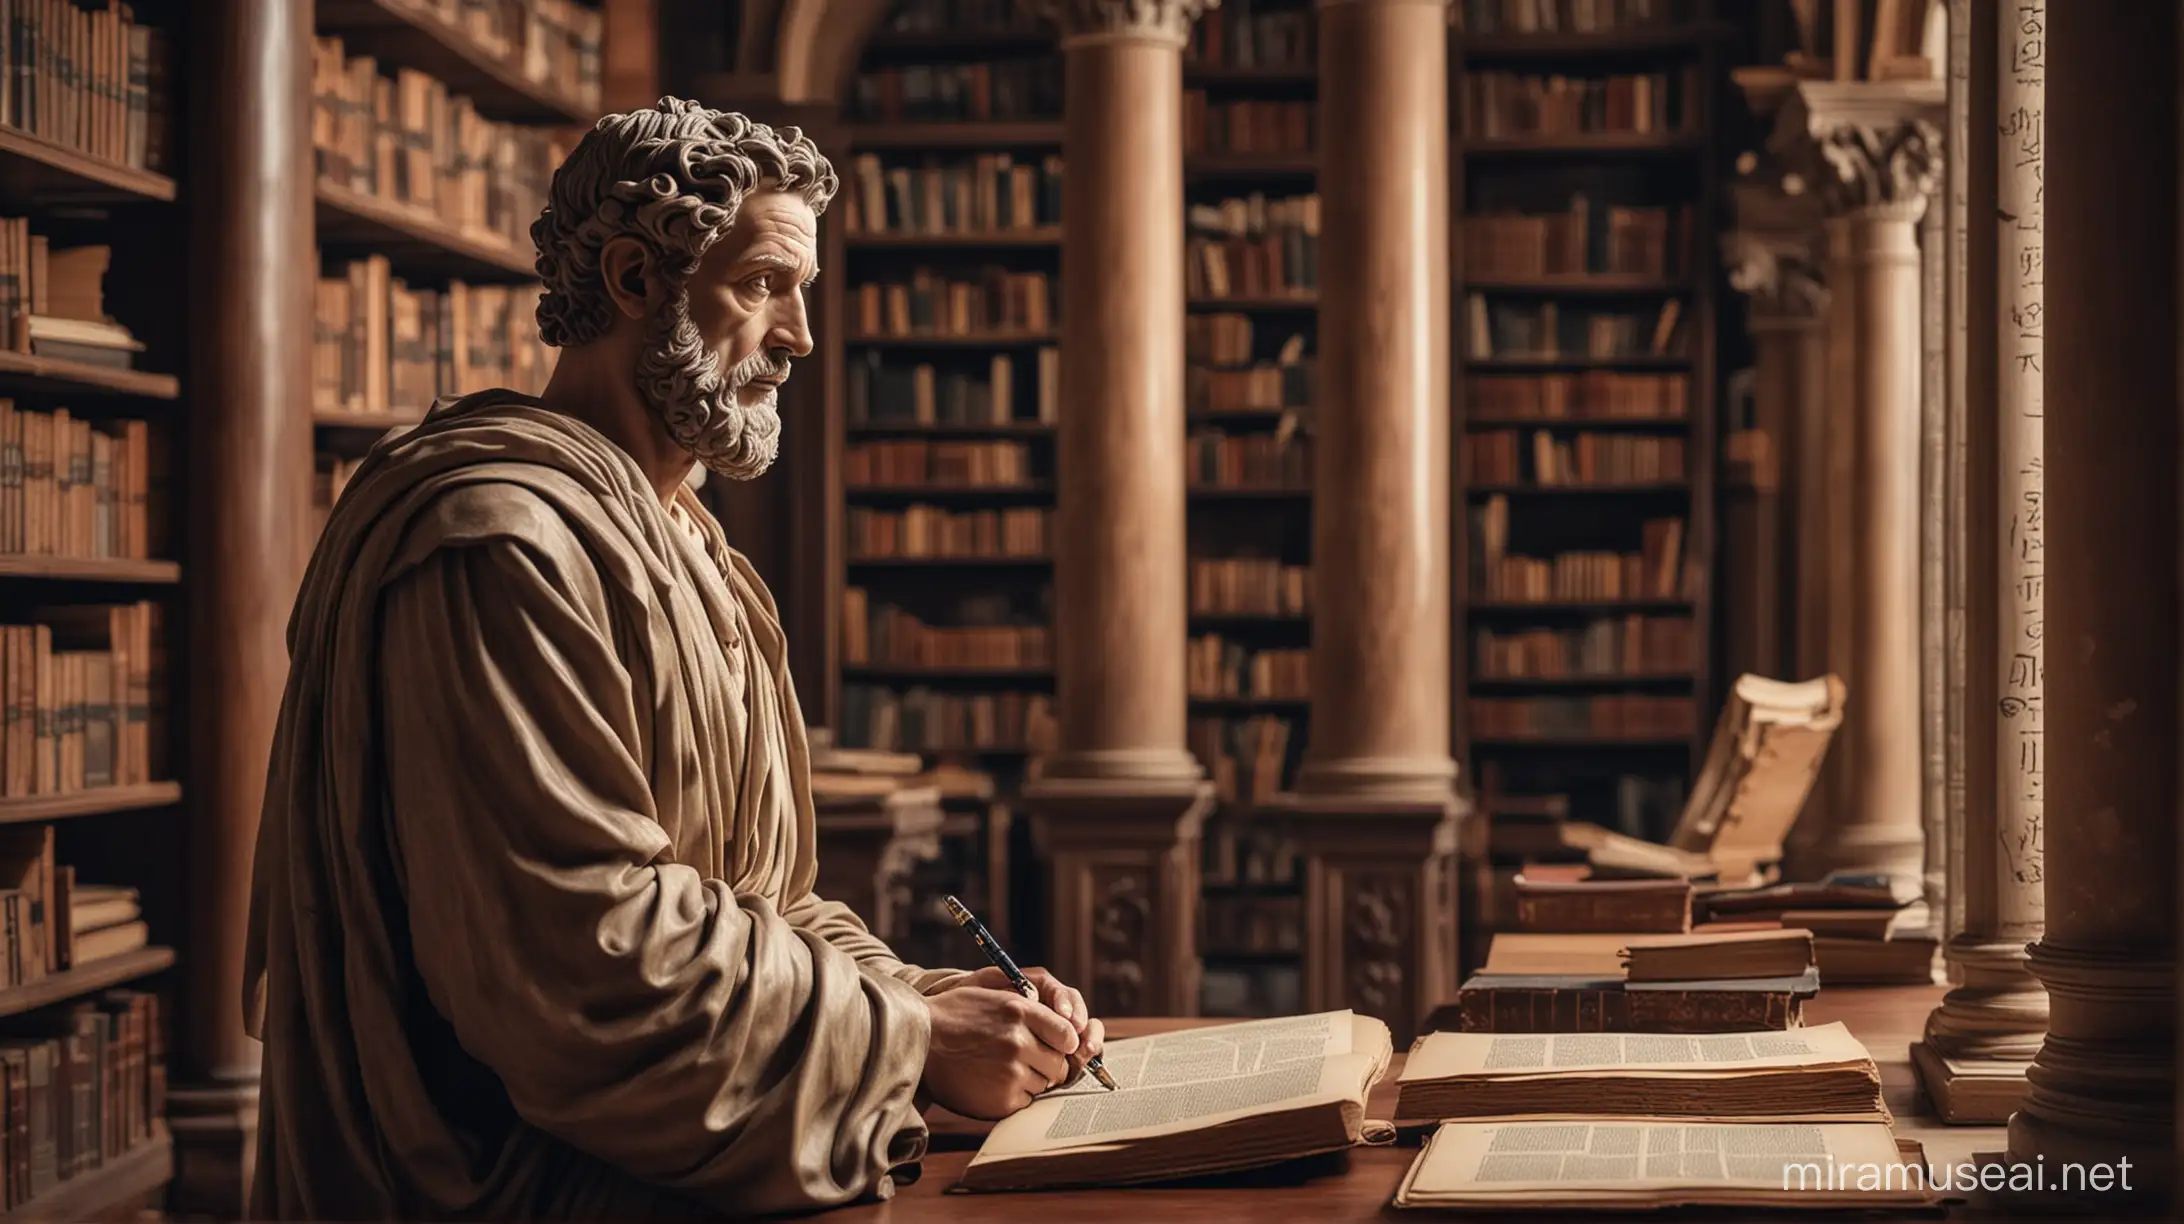 Create an image of an ancient Stoic philosopher in a professional setting. The character should be depicted [The Stoic philosopher standing in a grand library, surrounded by shelves of scrolls and books, deep in thought] reflecting the principles of Stoicism